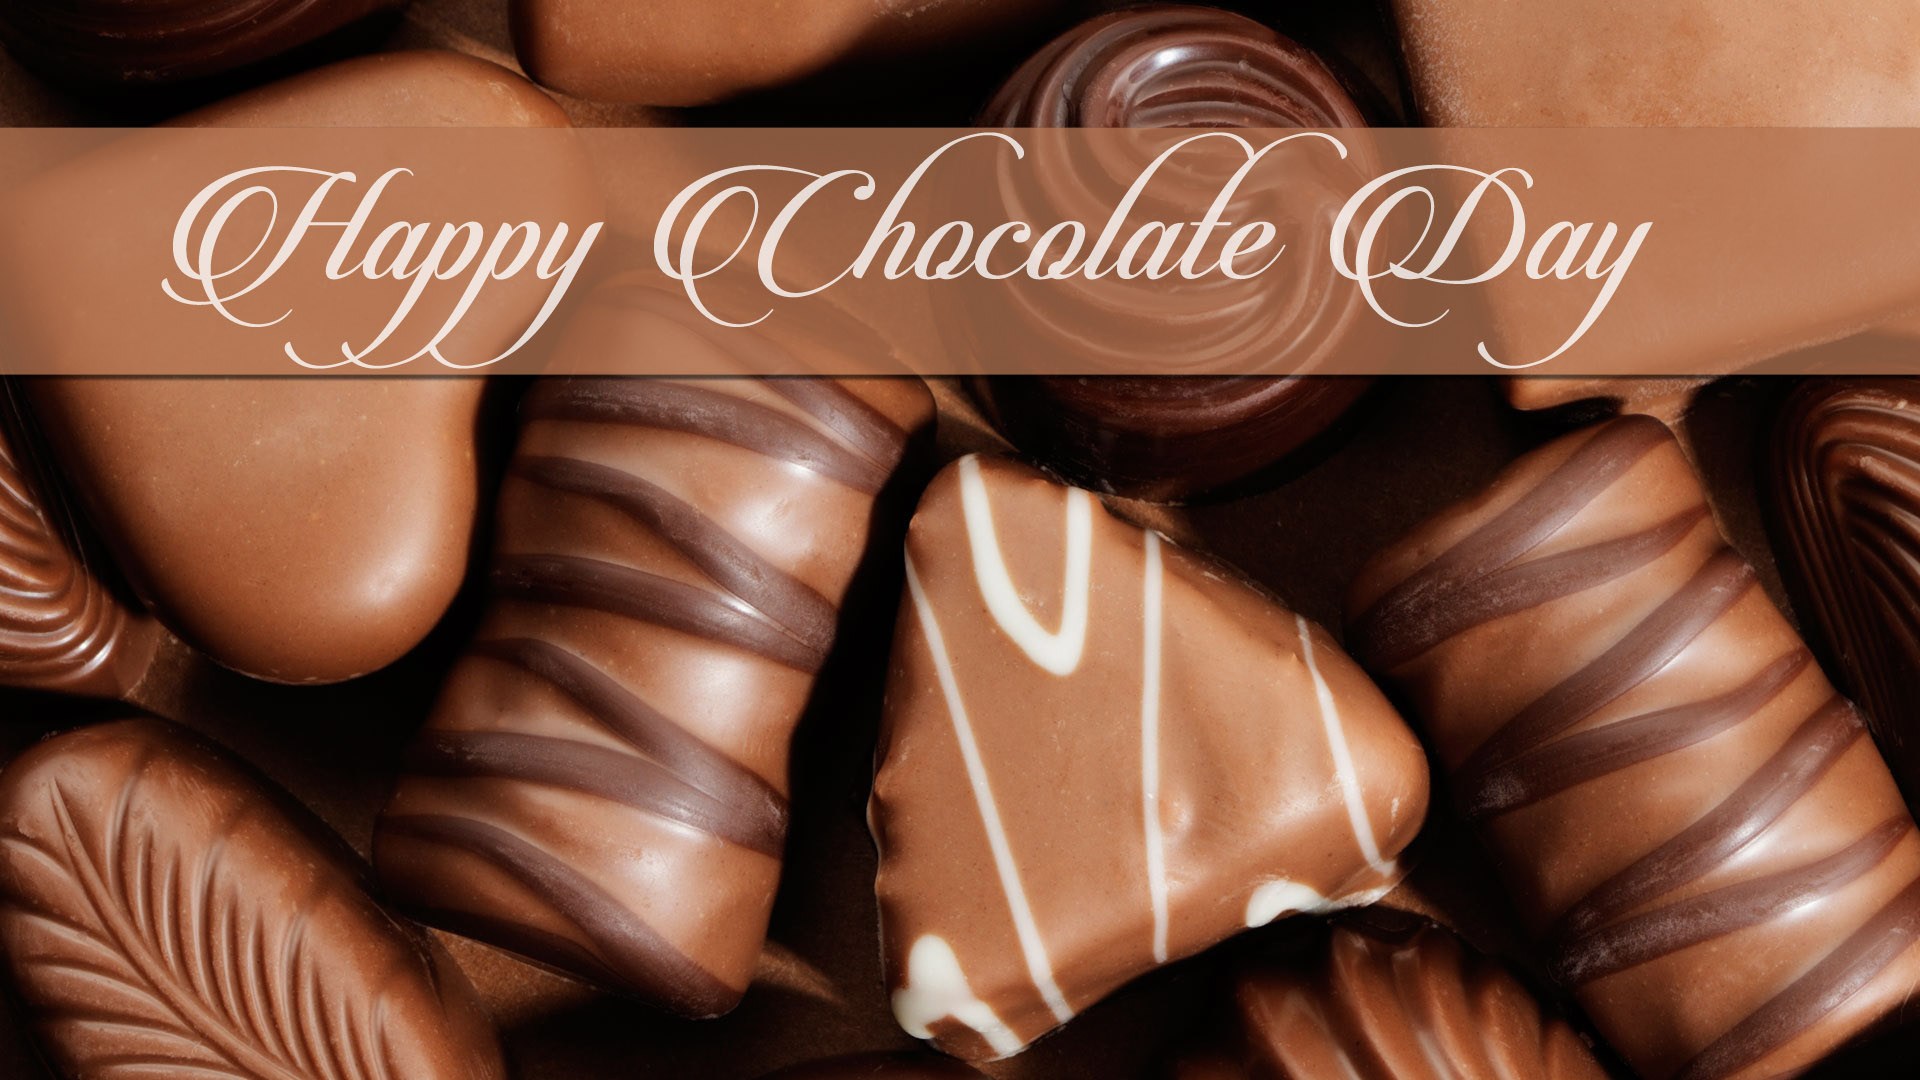 Chocolate Day Images for Whatsapp DP, Profile Wallpapers – Free Download